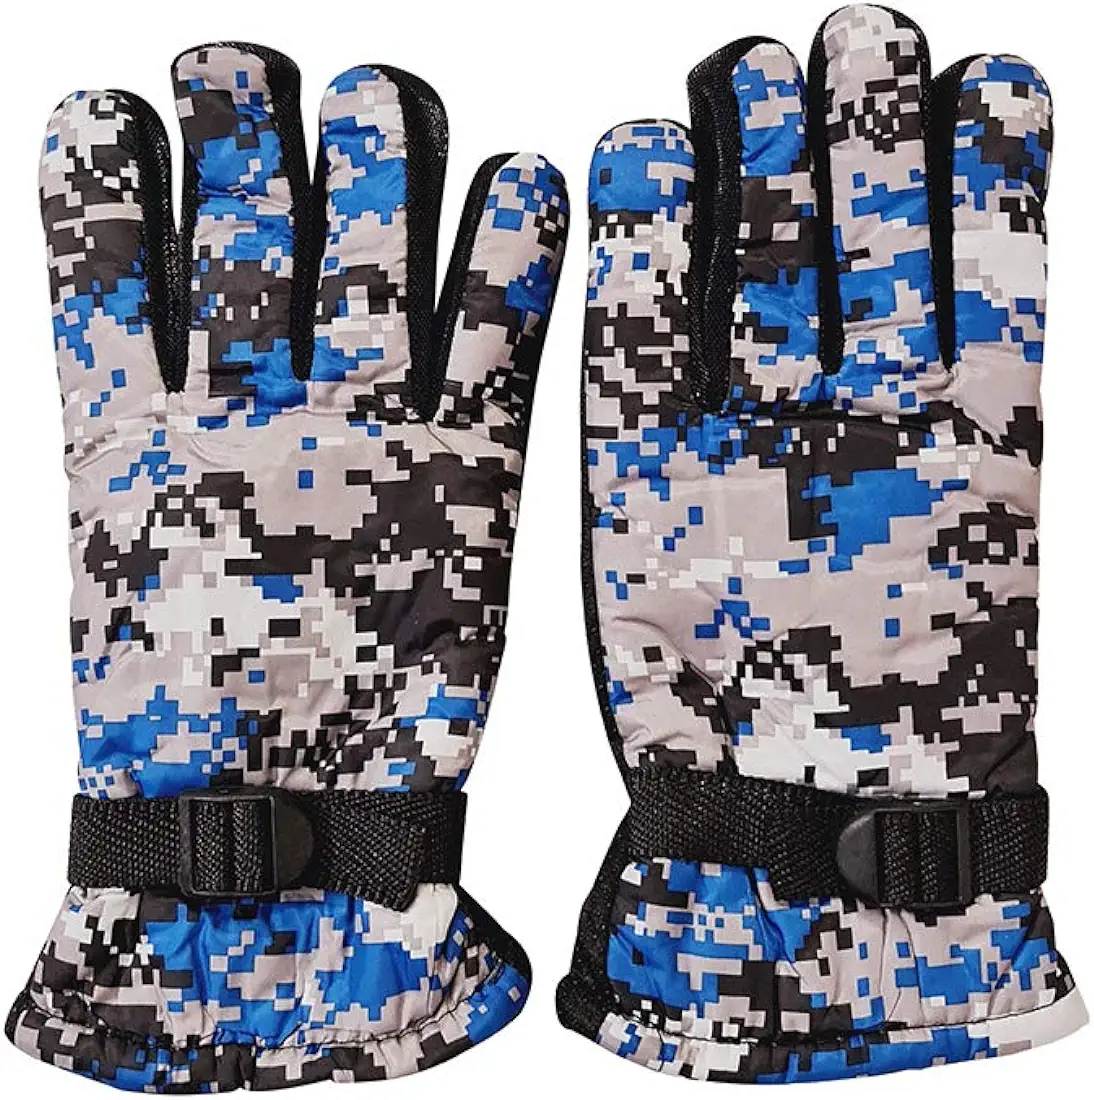 Winter Gloves Army Style - Blue